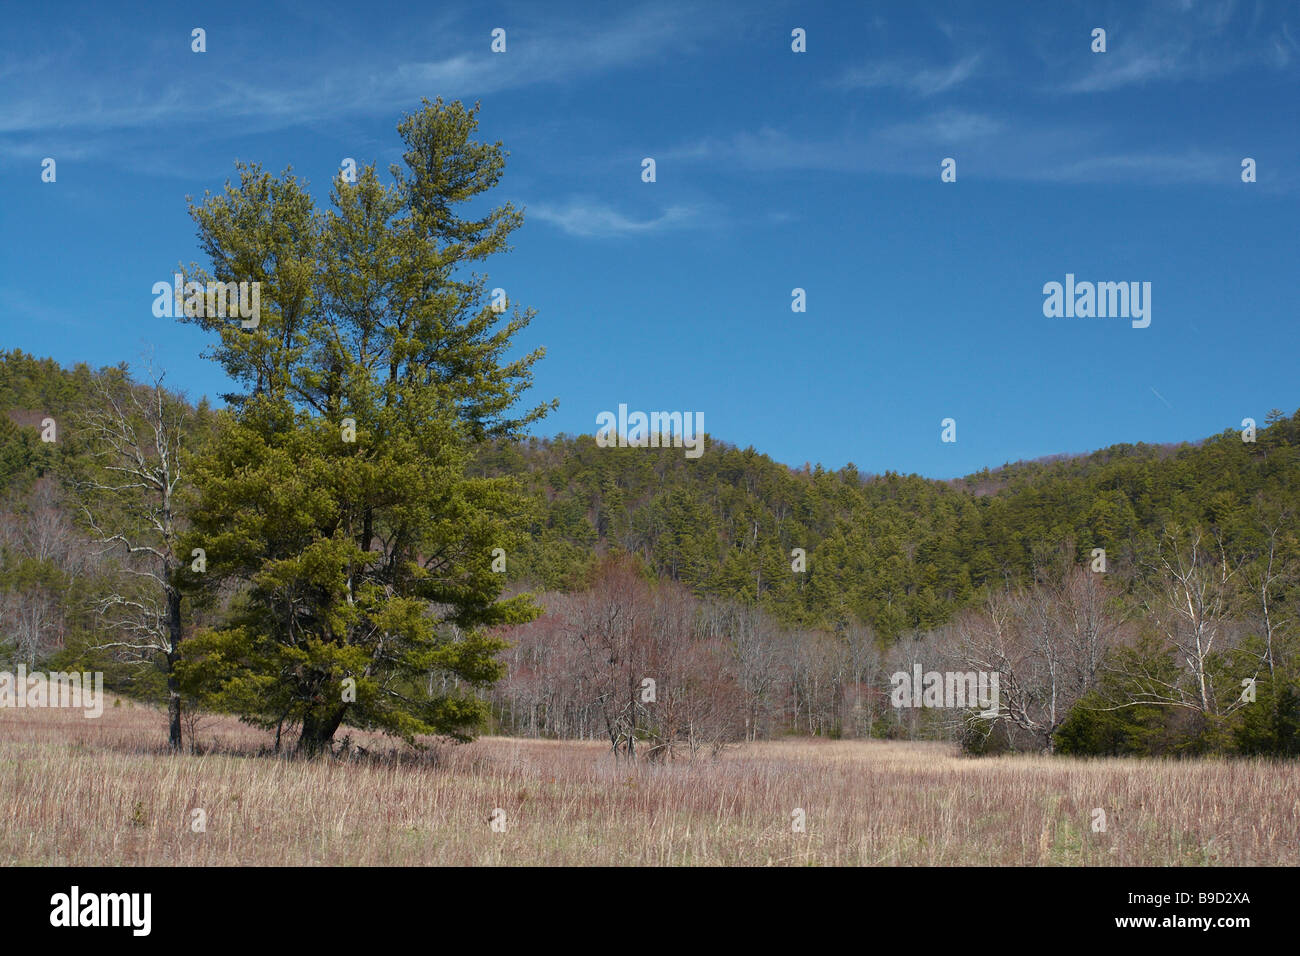 La Cades Cove Tennessee Smoky Mountains Banque D'Images